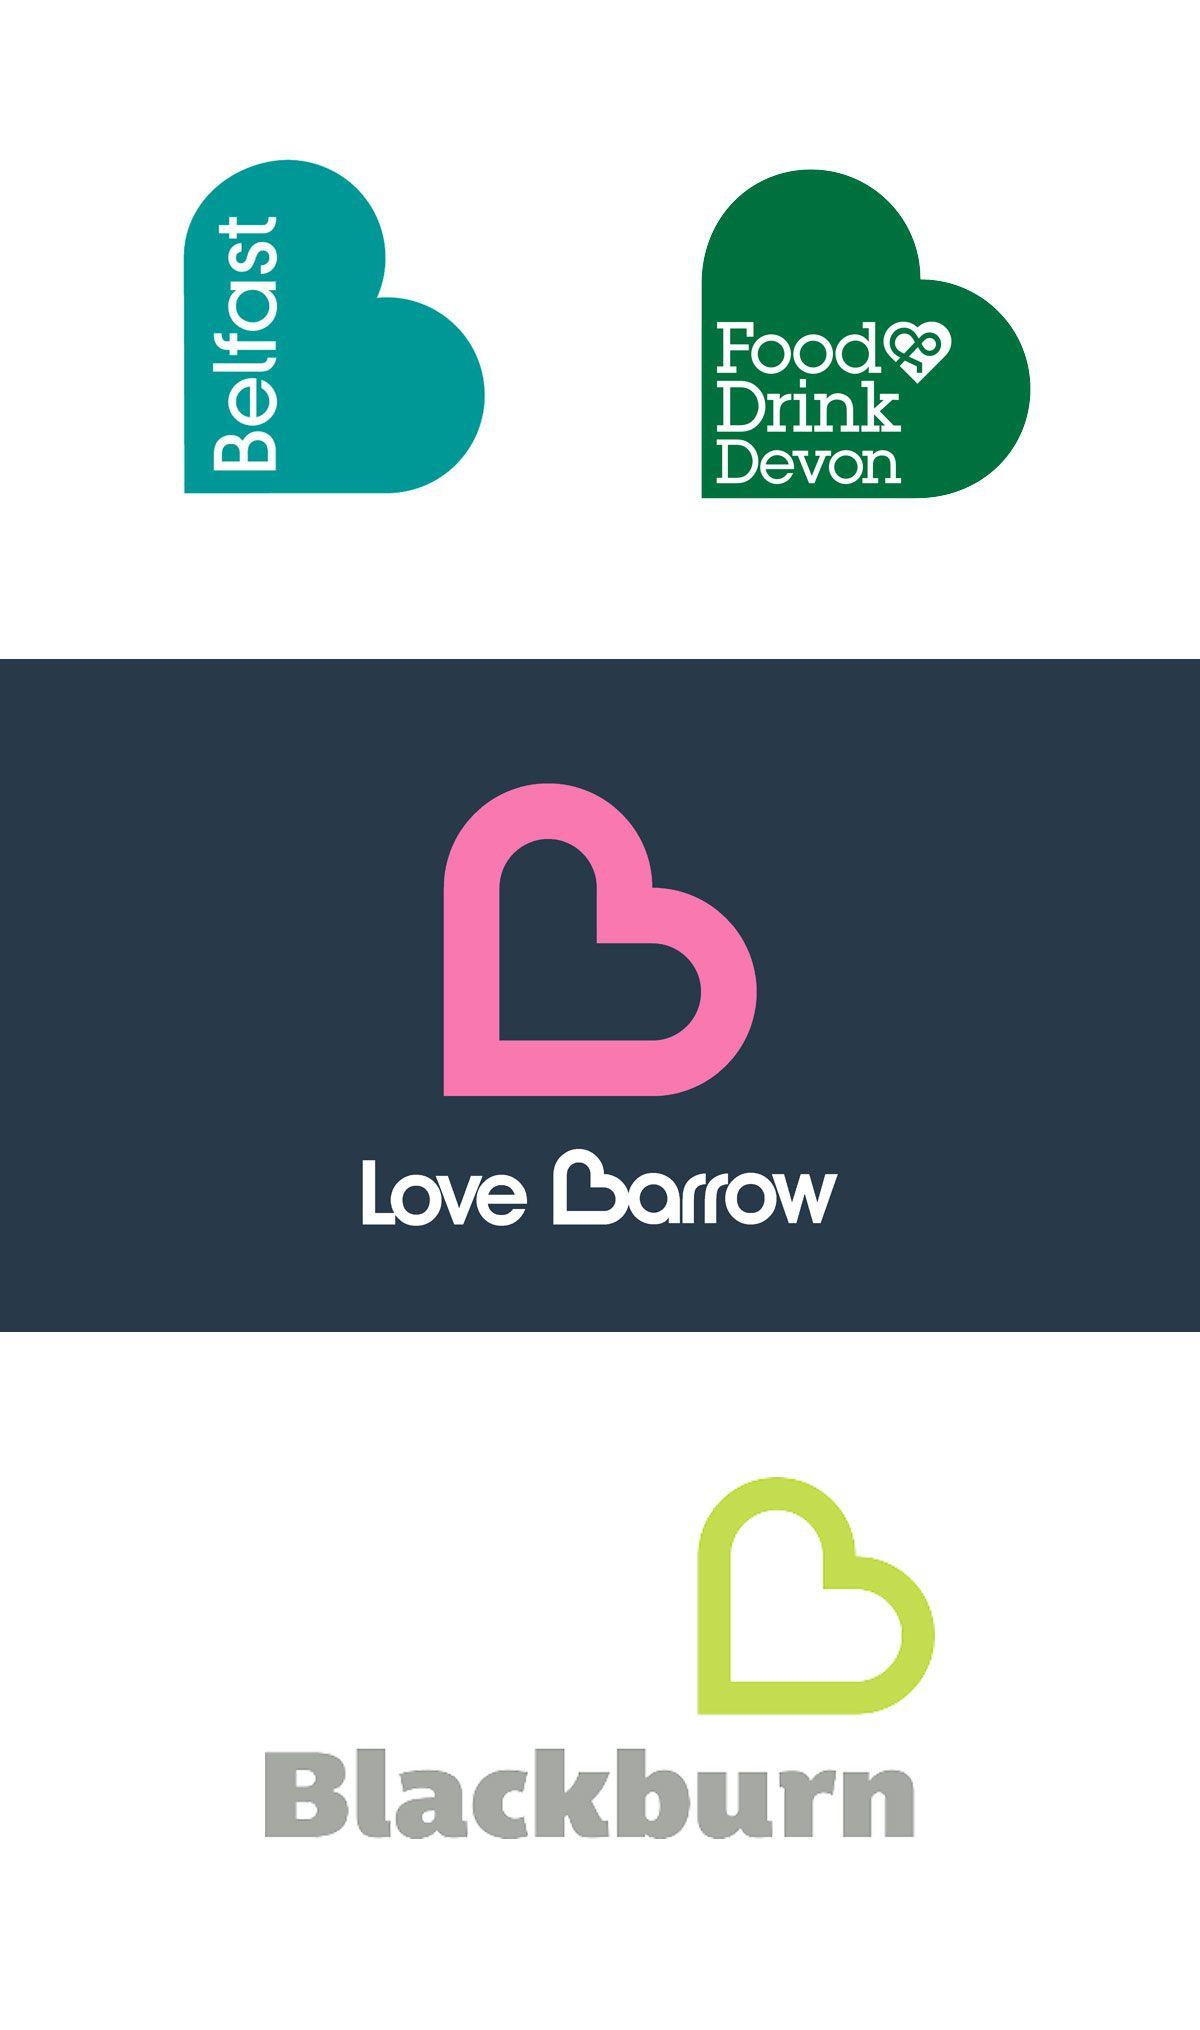 Heart Shaped Food and Drink Logo - New Belfast logo and the typical tabloid response | Logo Design Love